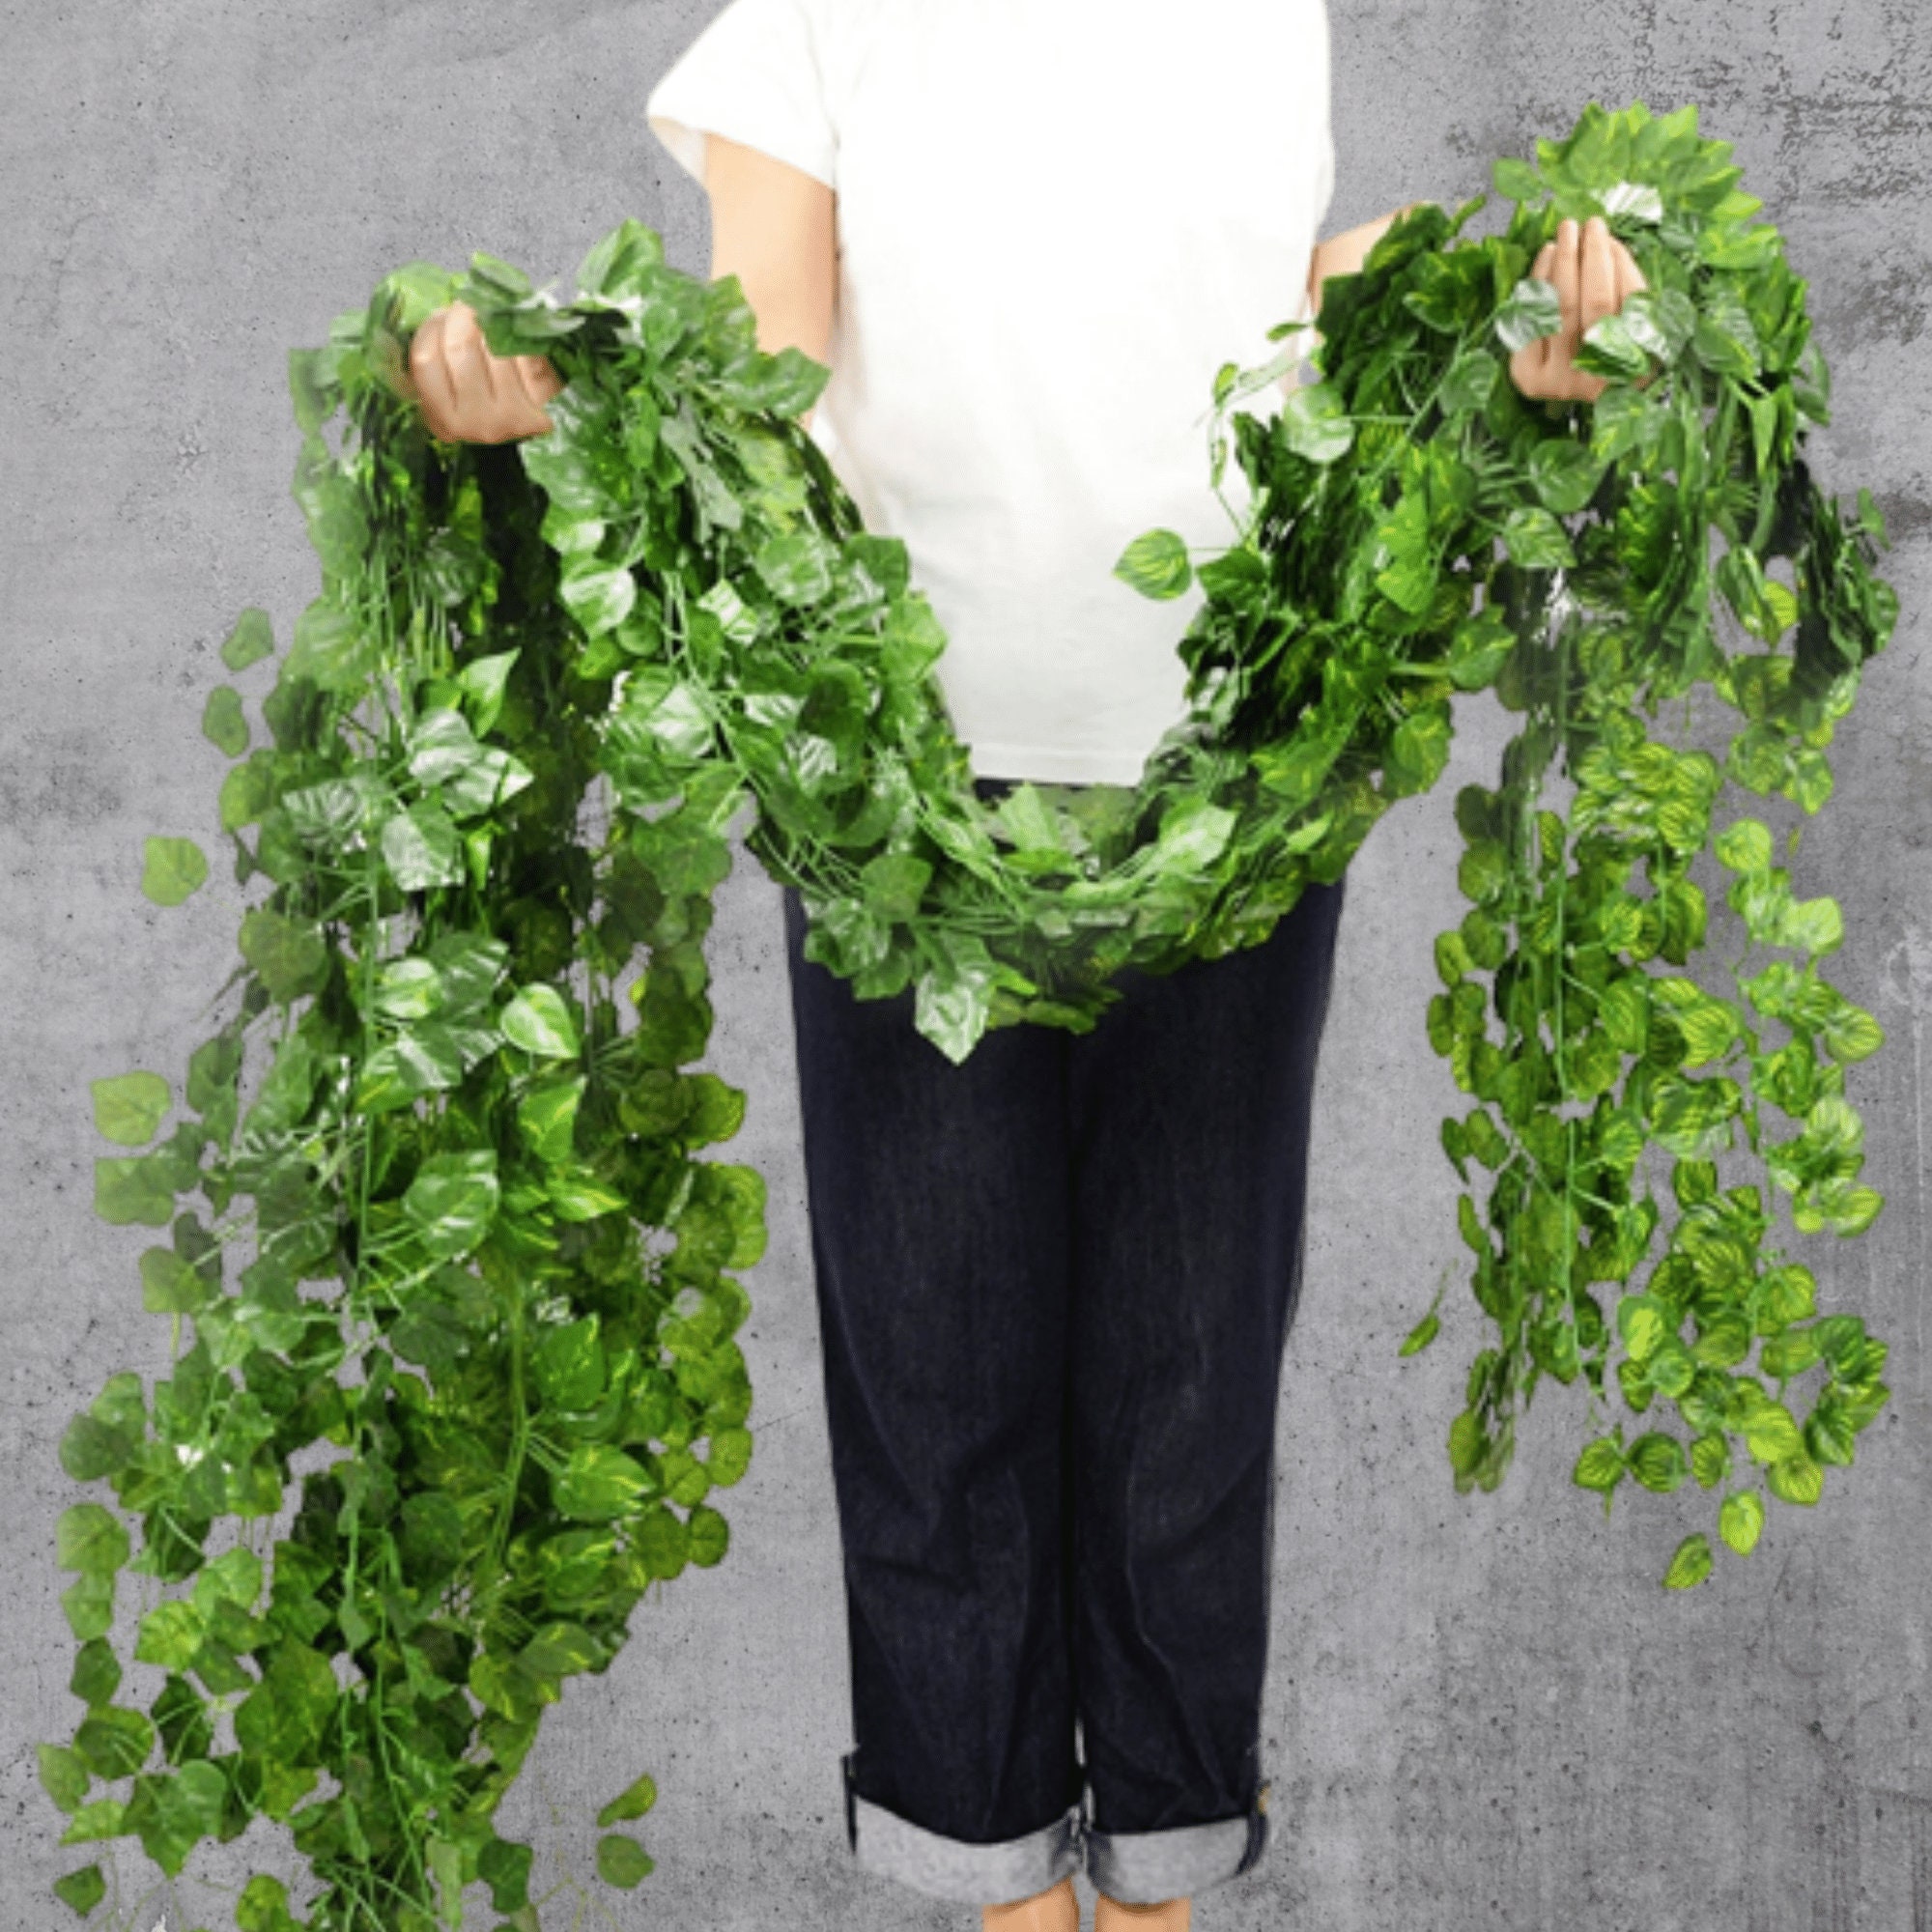 Fake Ivy Leaves, Set of 12 Artificial Greenery Garlands for